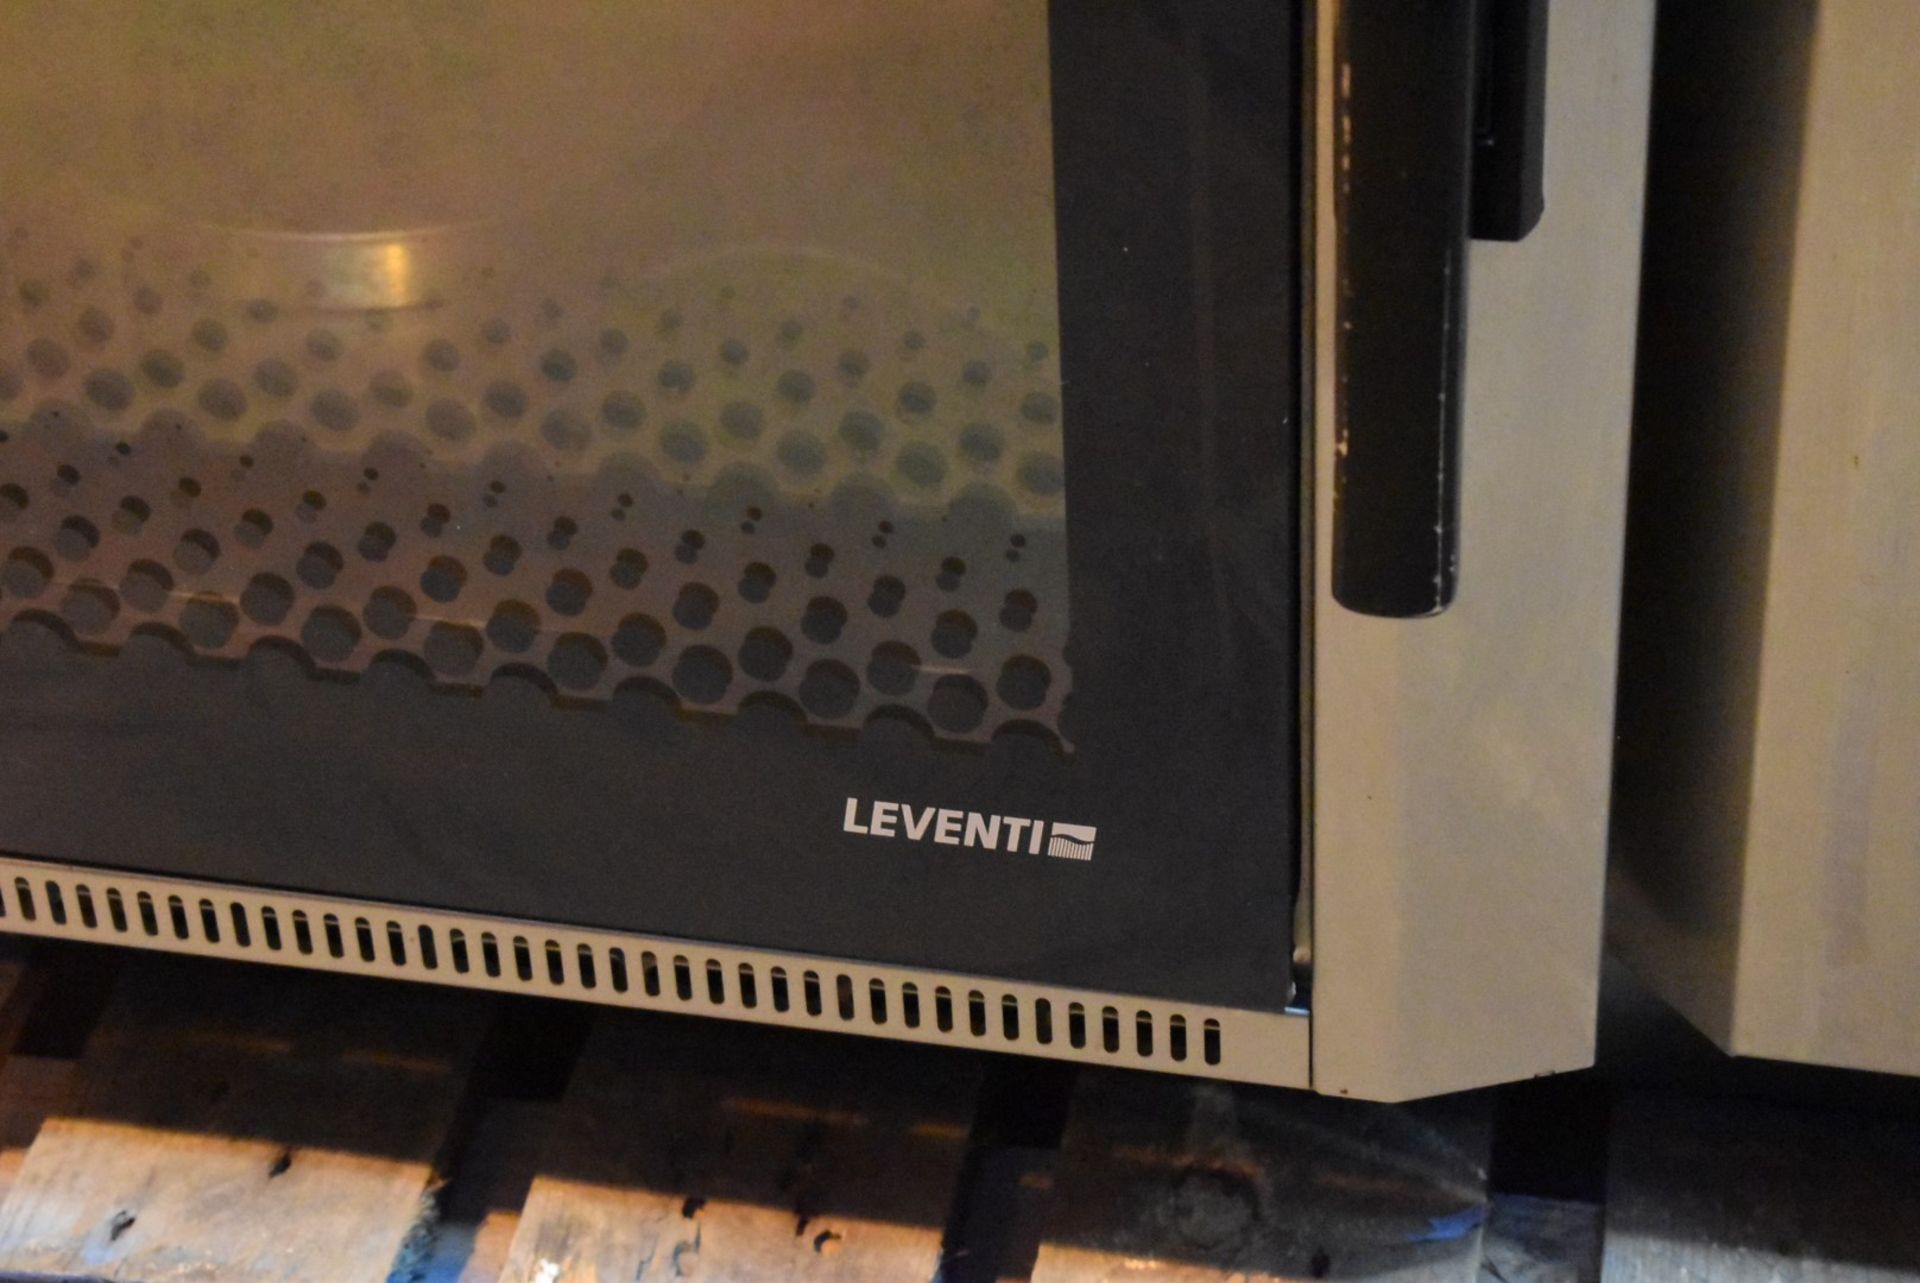 1 x Leventi Combimat mk3.1 Mastermind 6 Grid Combi Steam Oven - 3 Phase - Recently Removed From a - Image 9 of 11